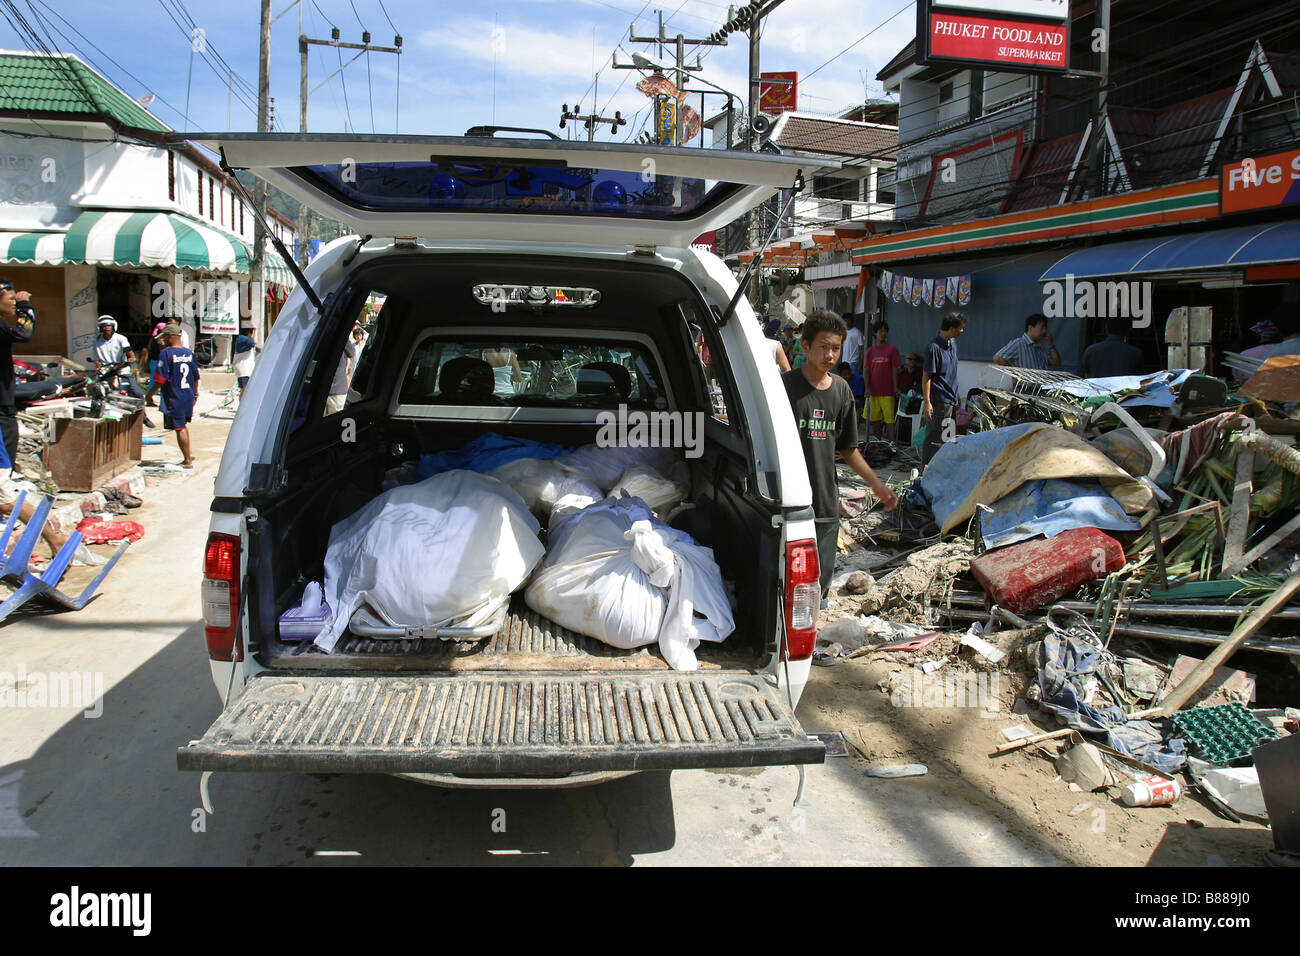 Dead bodies are collected in the back of a truck at Patong Beach, Phuket Island, Thailand after the December 26, 2004 tsunami. Stock Photo